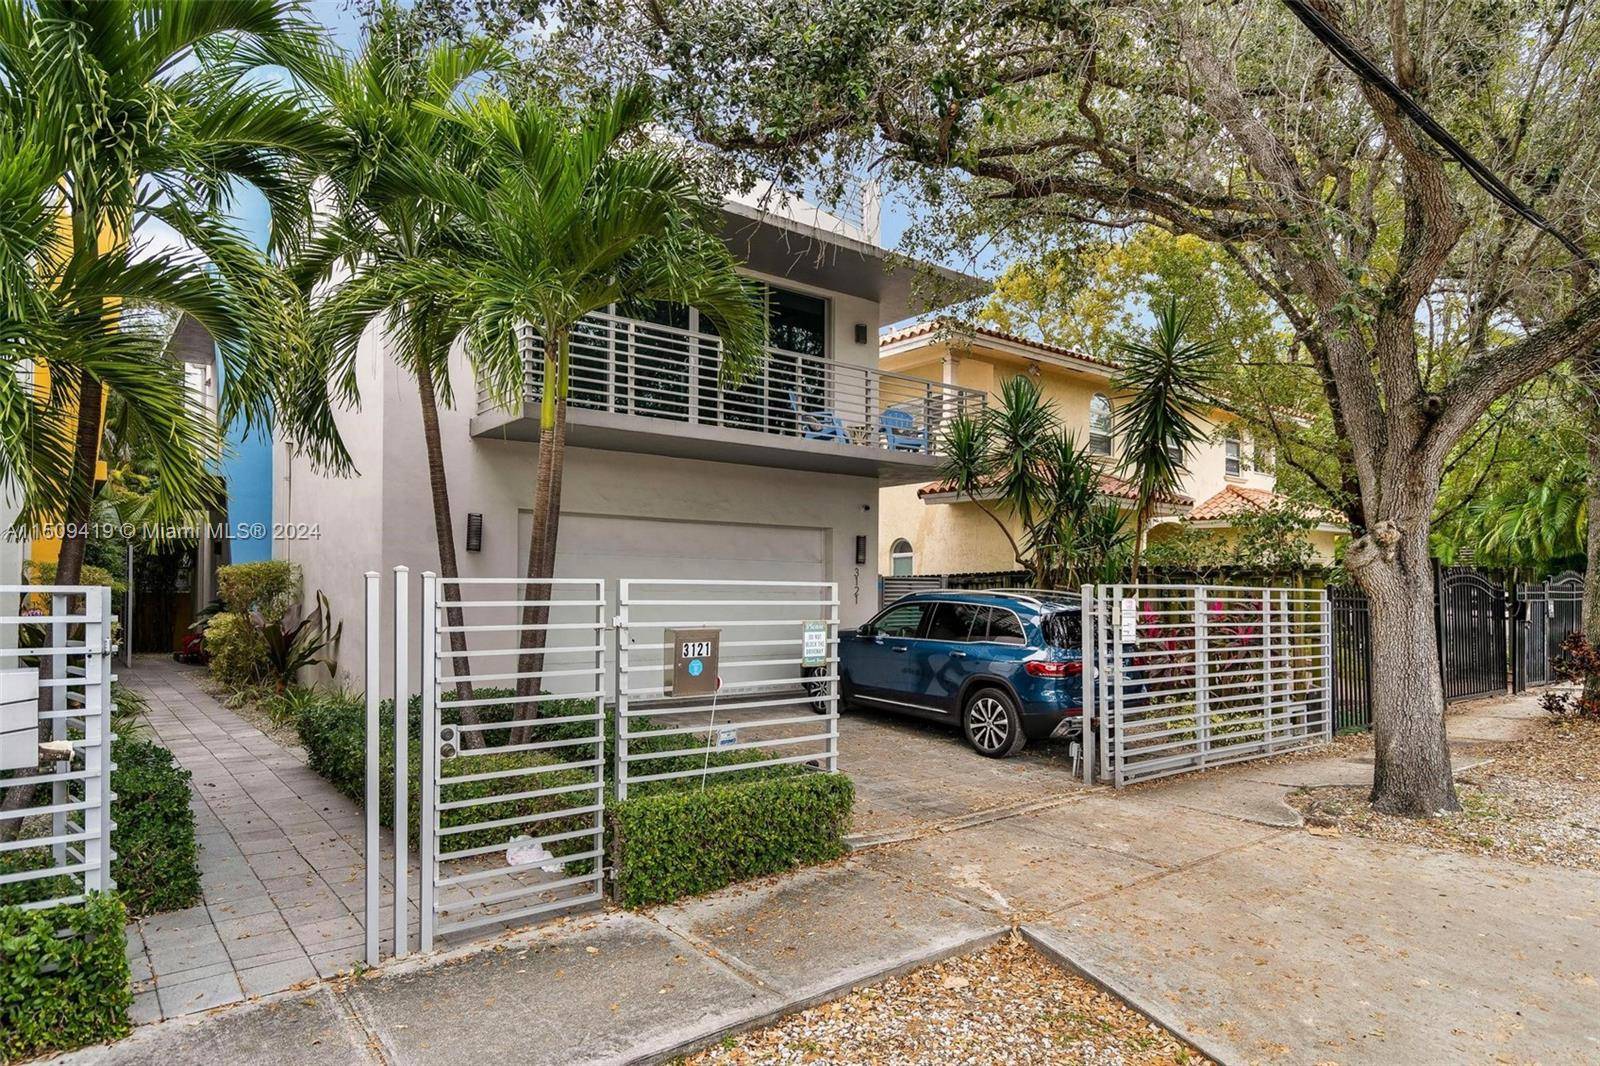 RECENTLY REPRICED UNIQUE PROPERTY Detached townhome in central Coconut Grove location with a rare 2 car garage, pool rooftop.